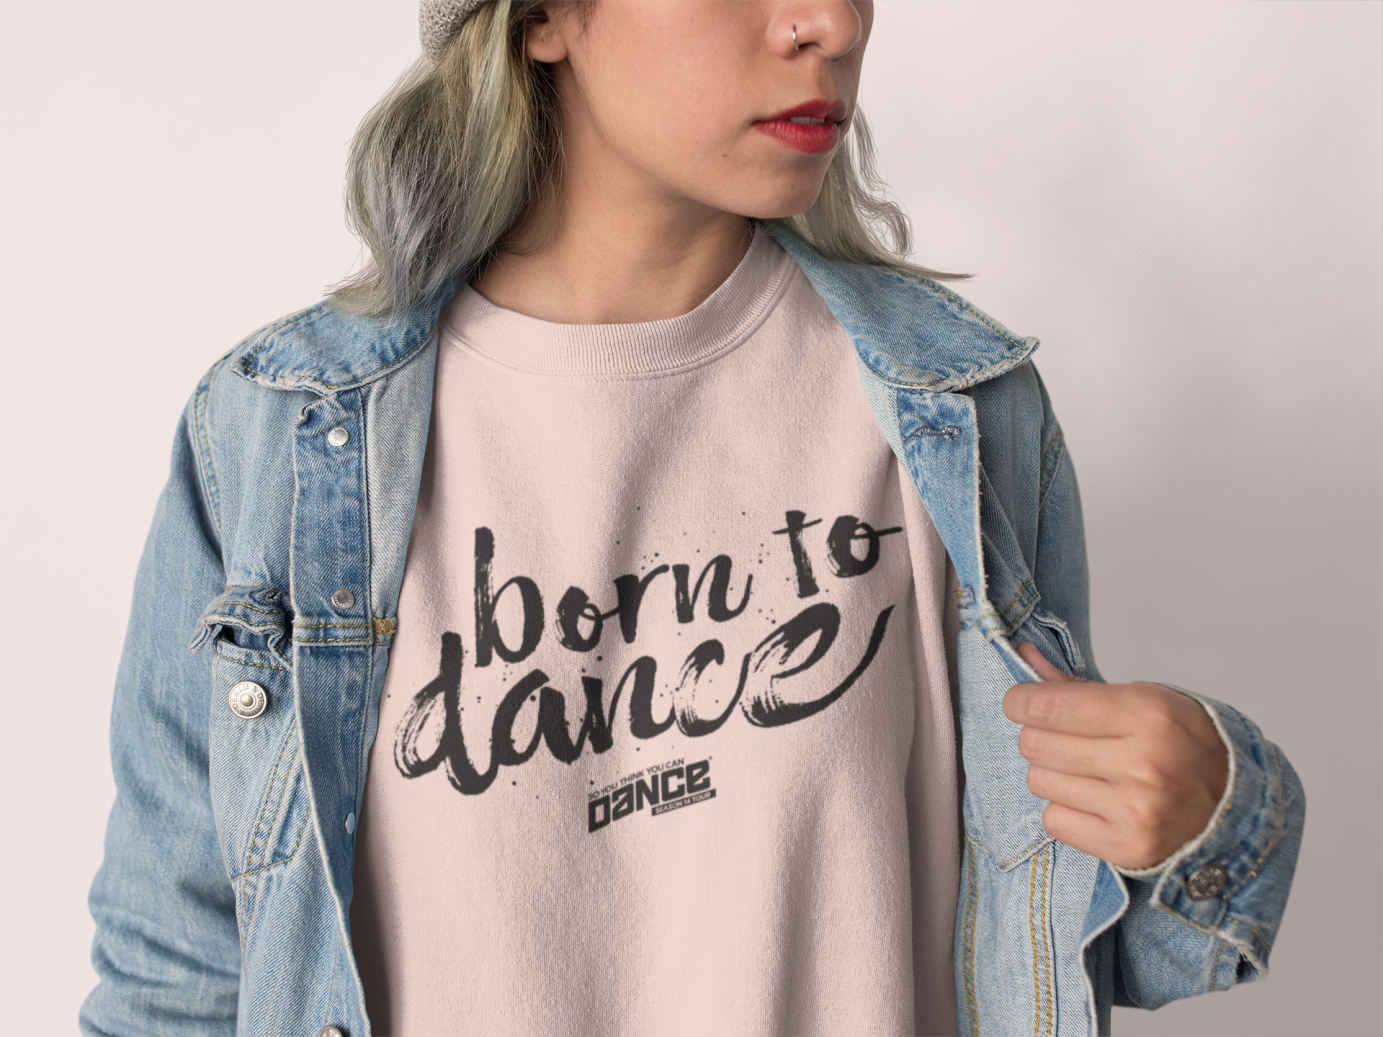 So You Think You Can Dance Tours